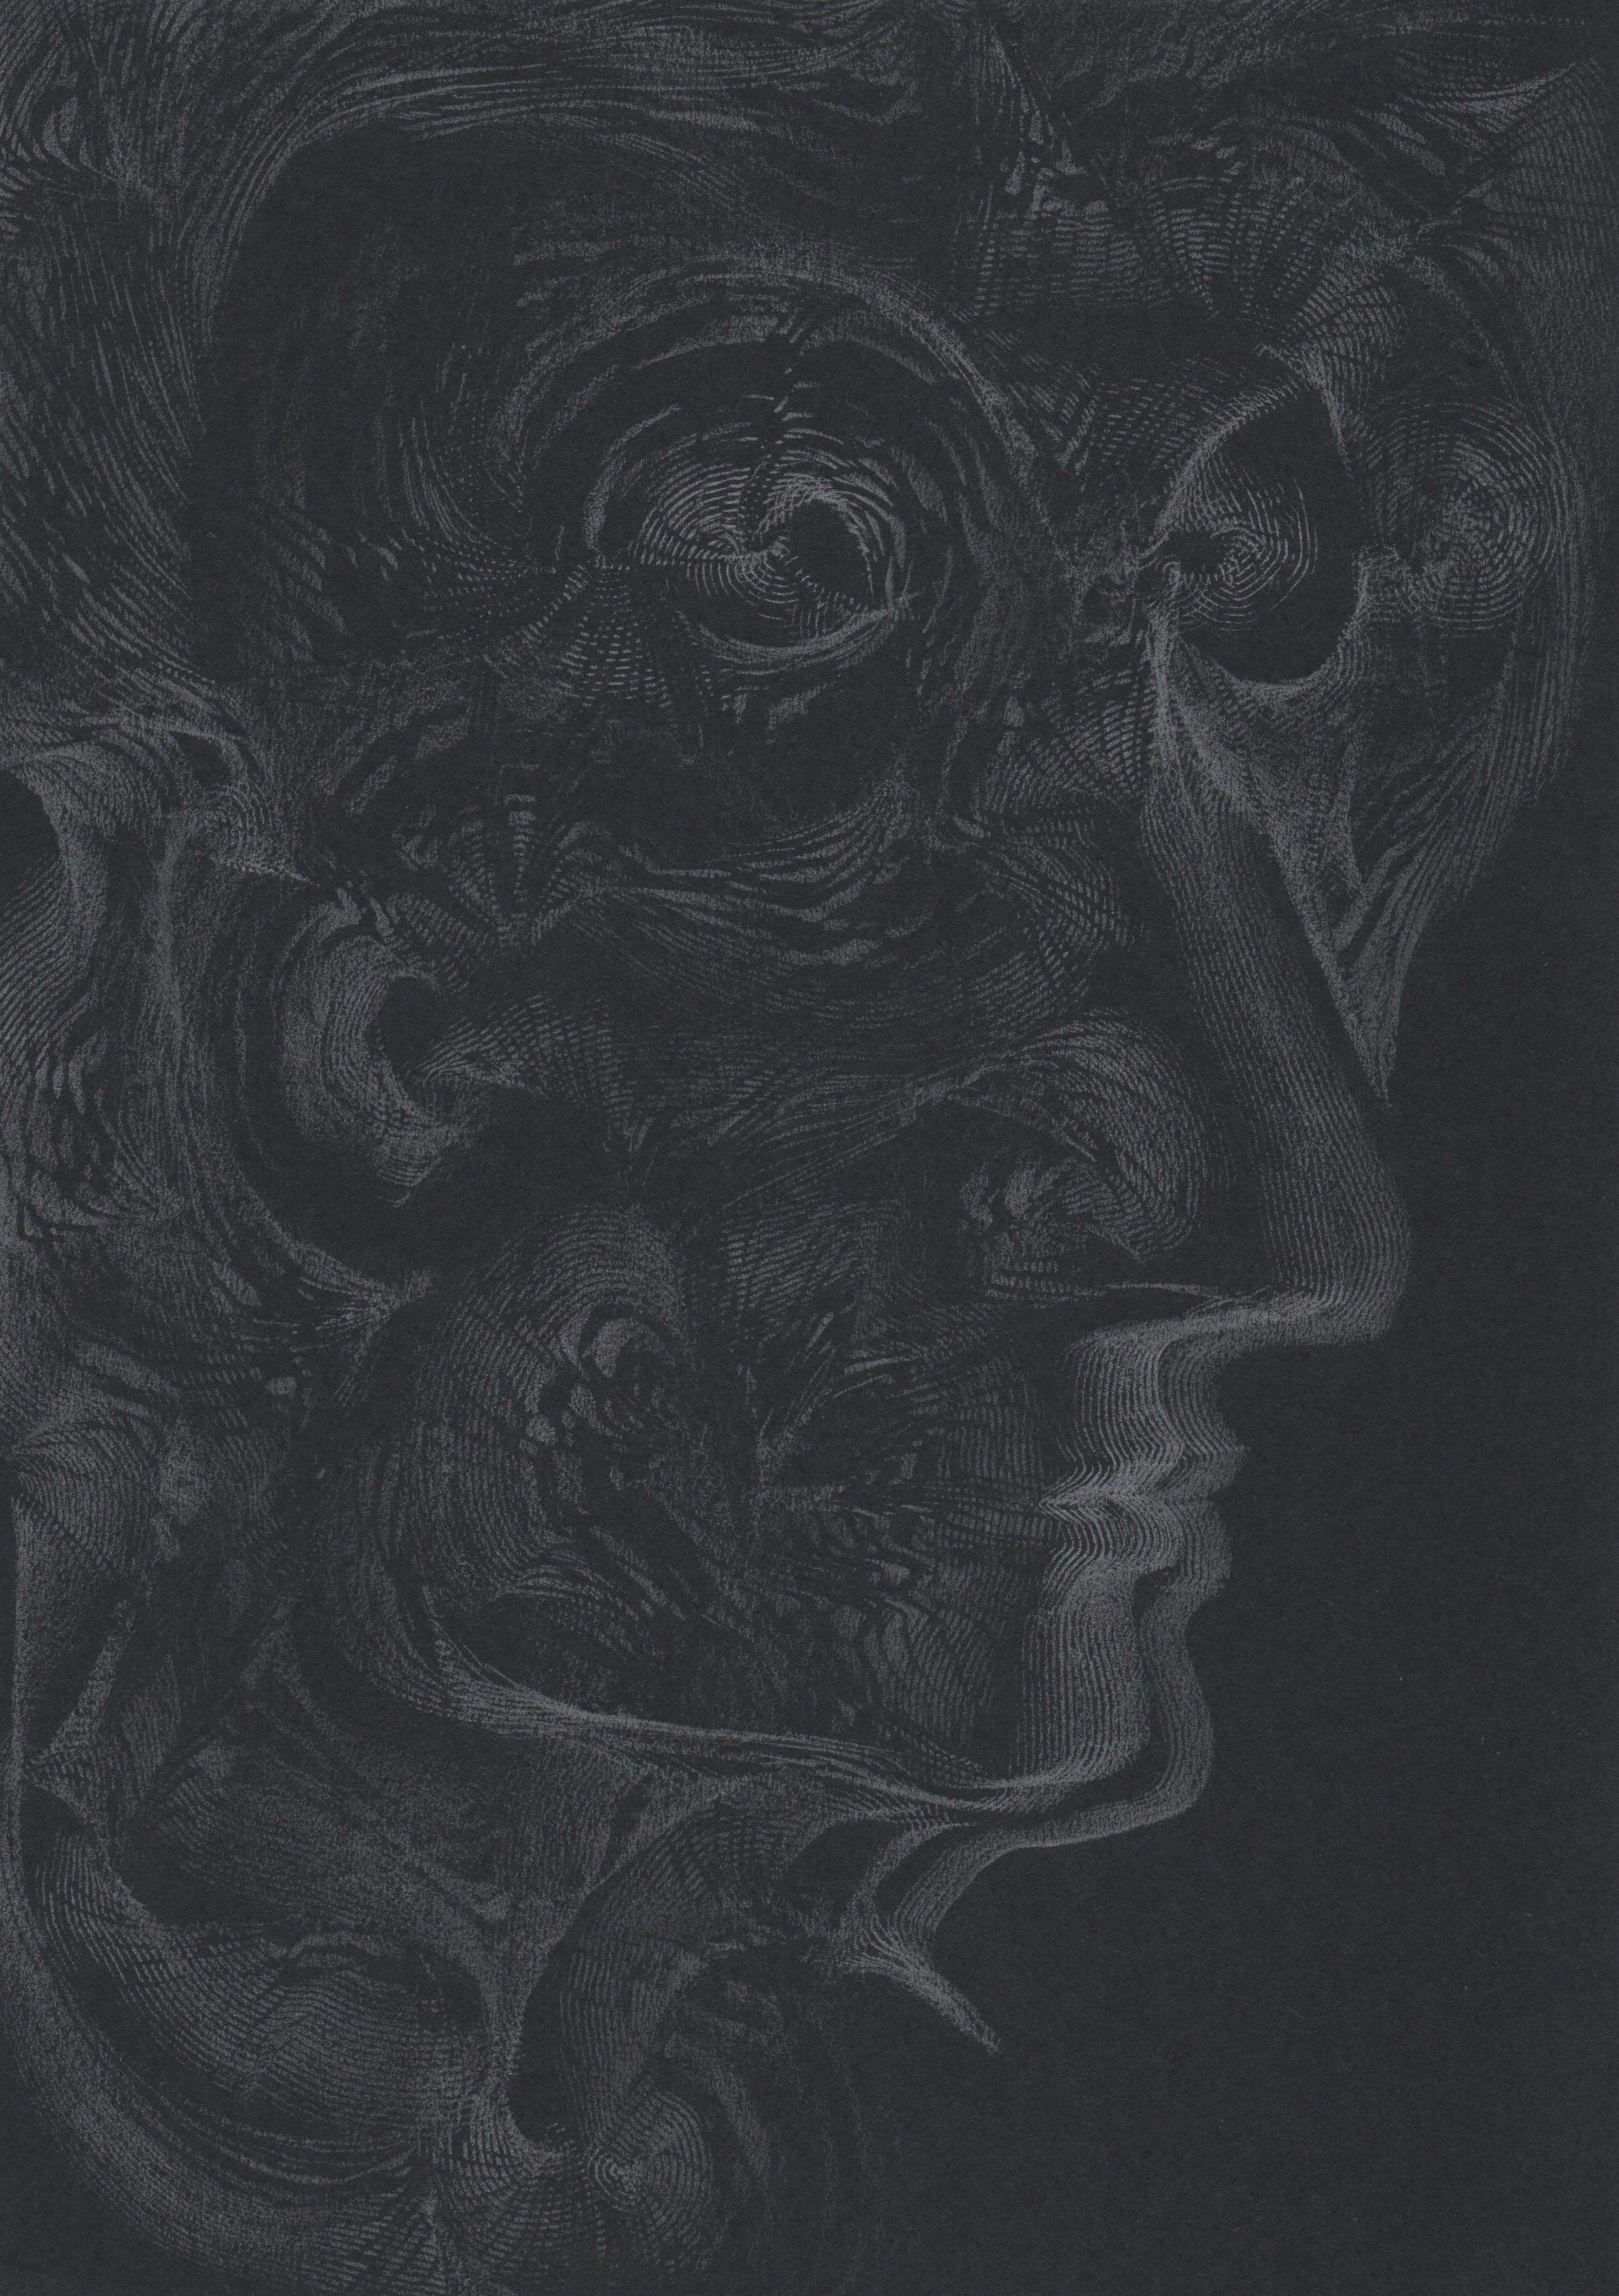 Volodymyr Zayichenko Abstract Drawing - 912019 TRSQ 1101P SSSS Chelsea London UK Drawing silver pencil on black paper A4